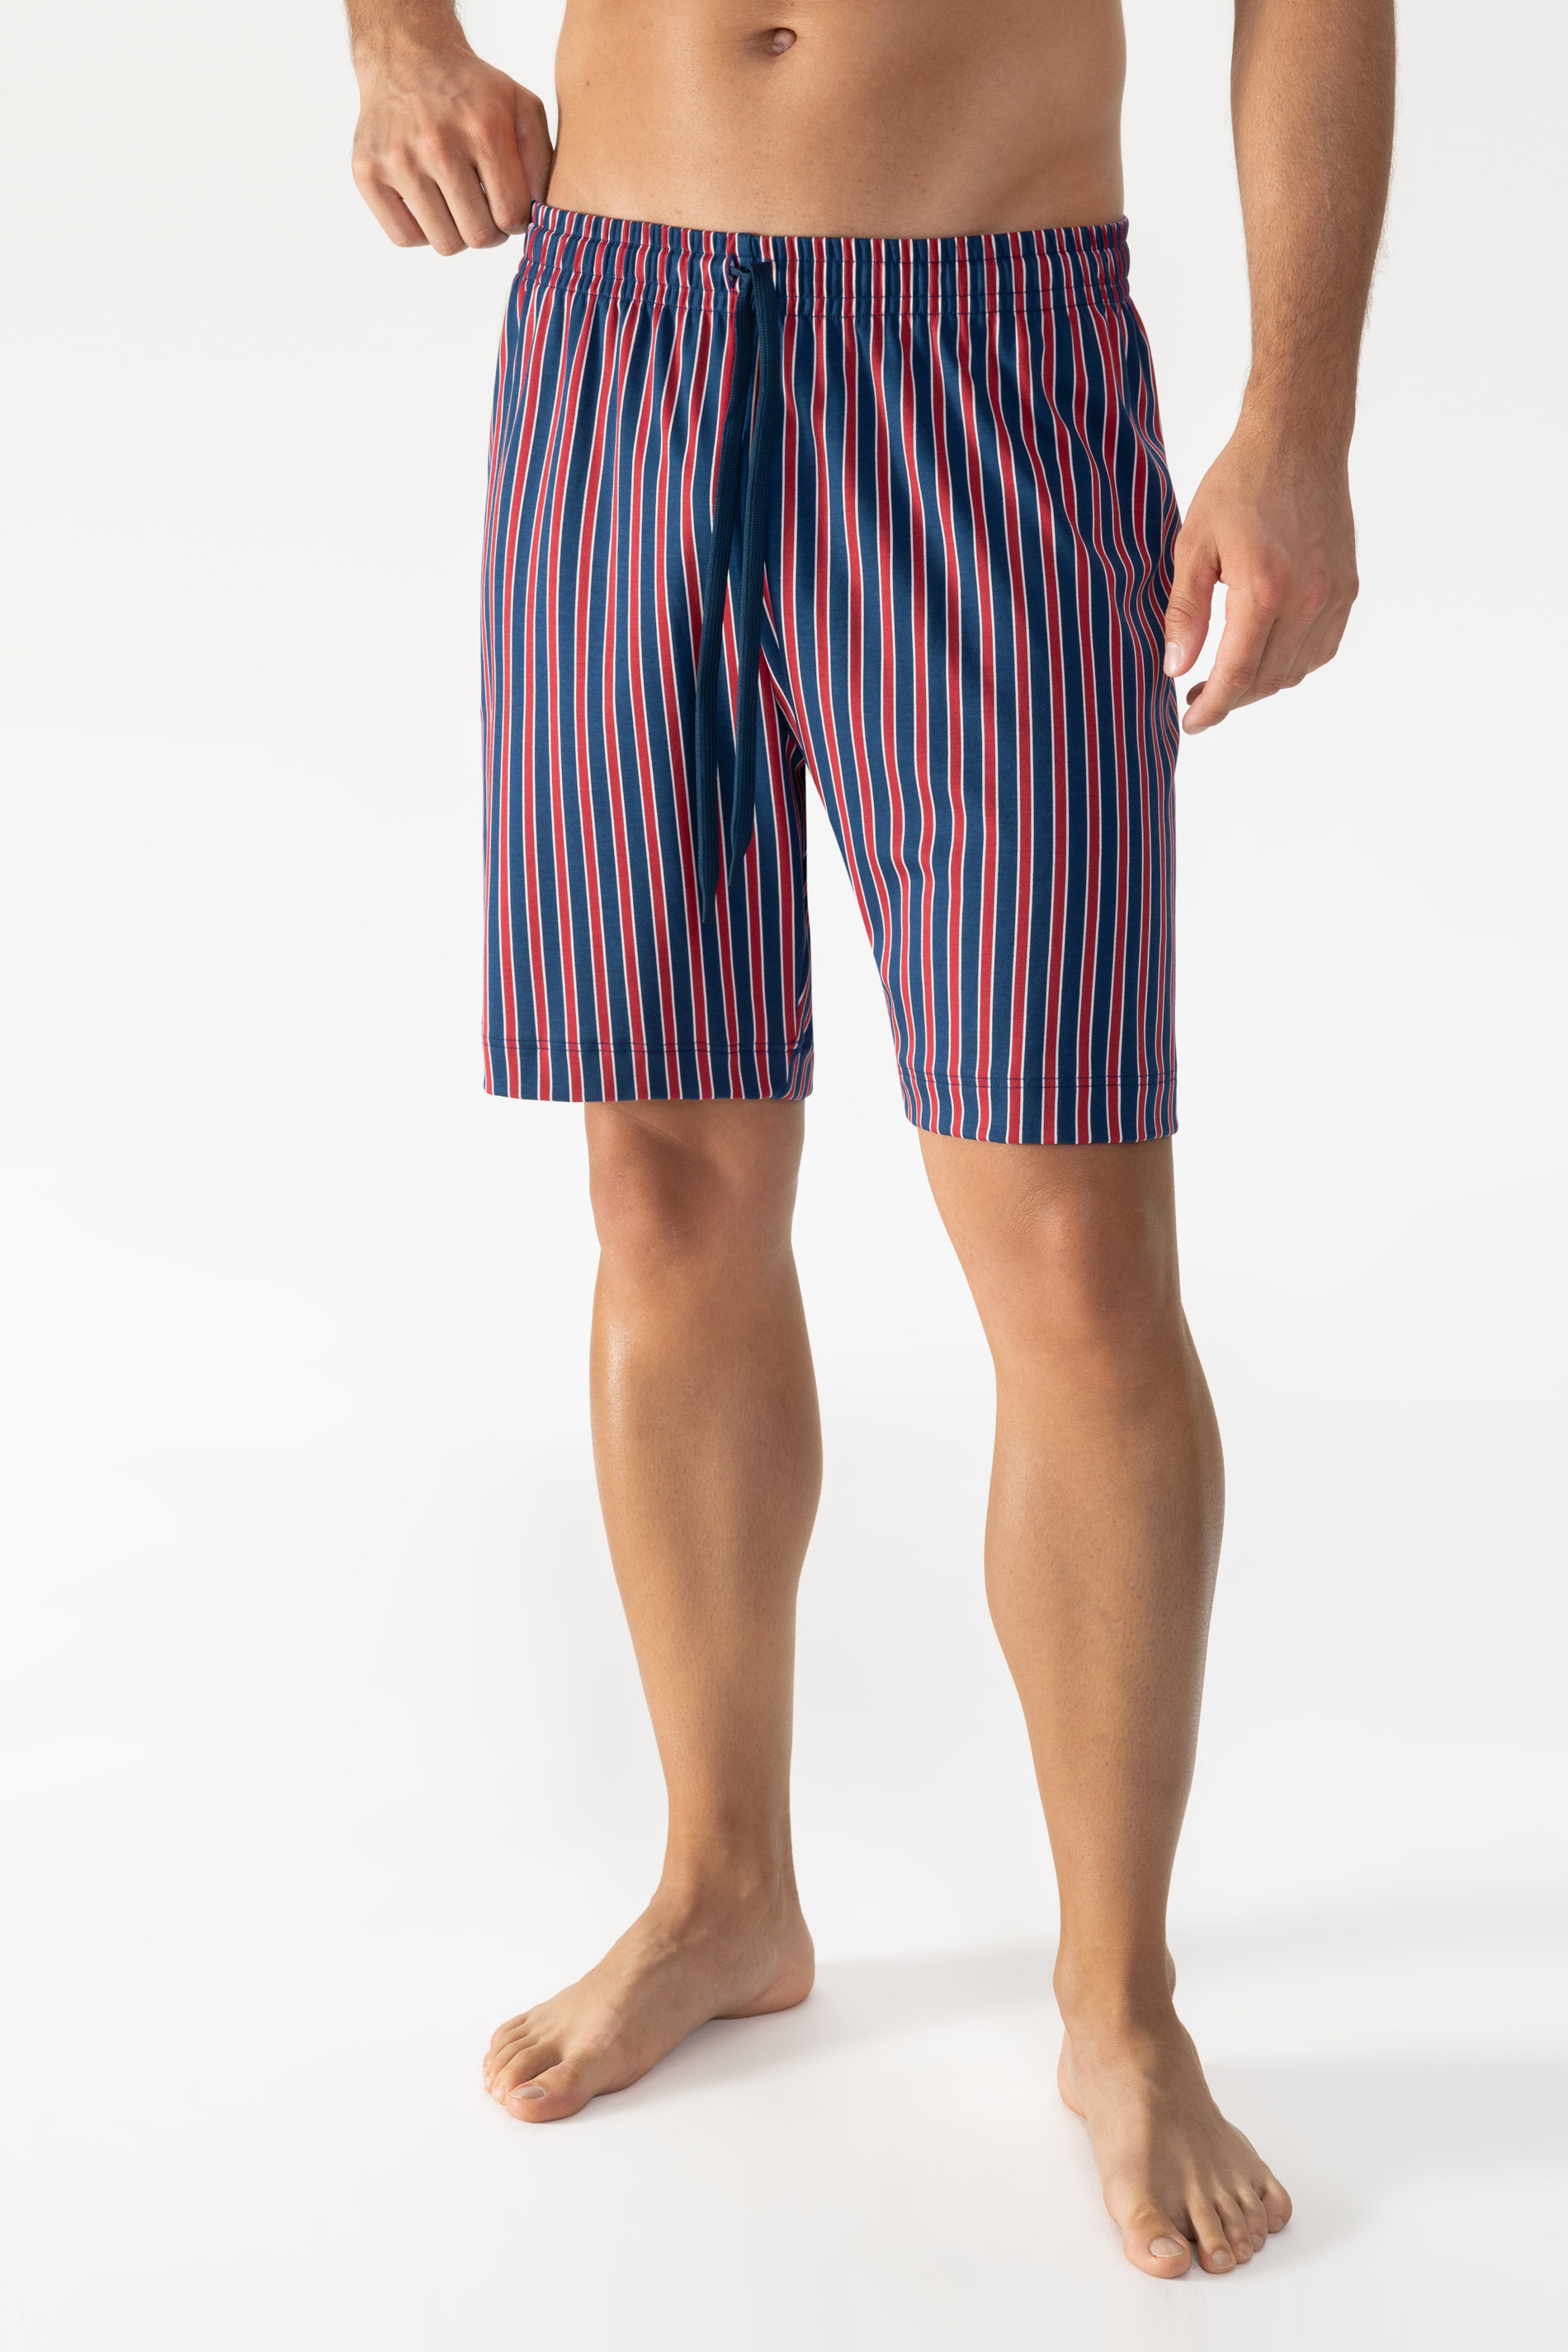 Shorts Serie Graphic Stripes Front View | mey®